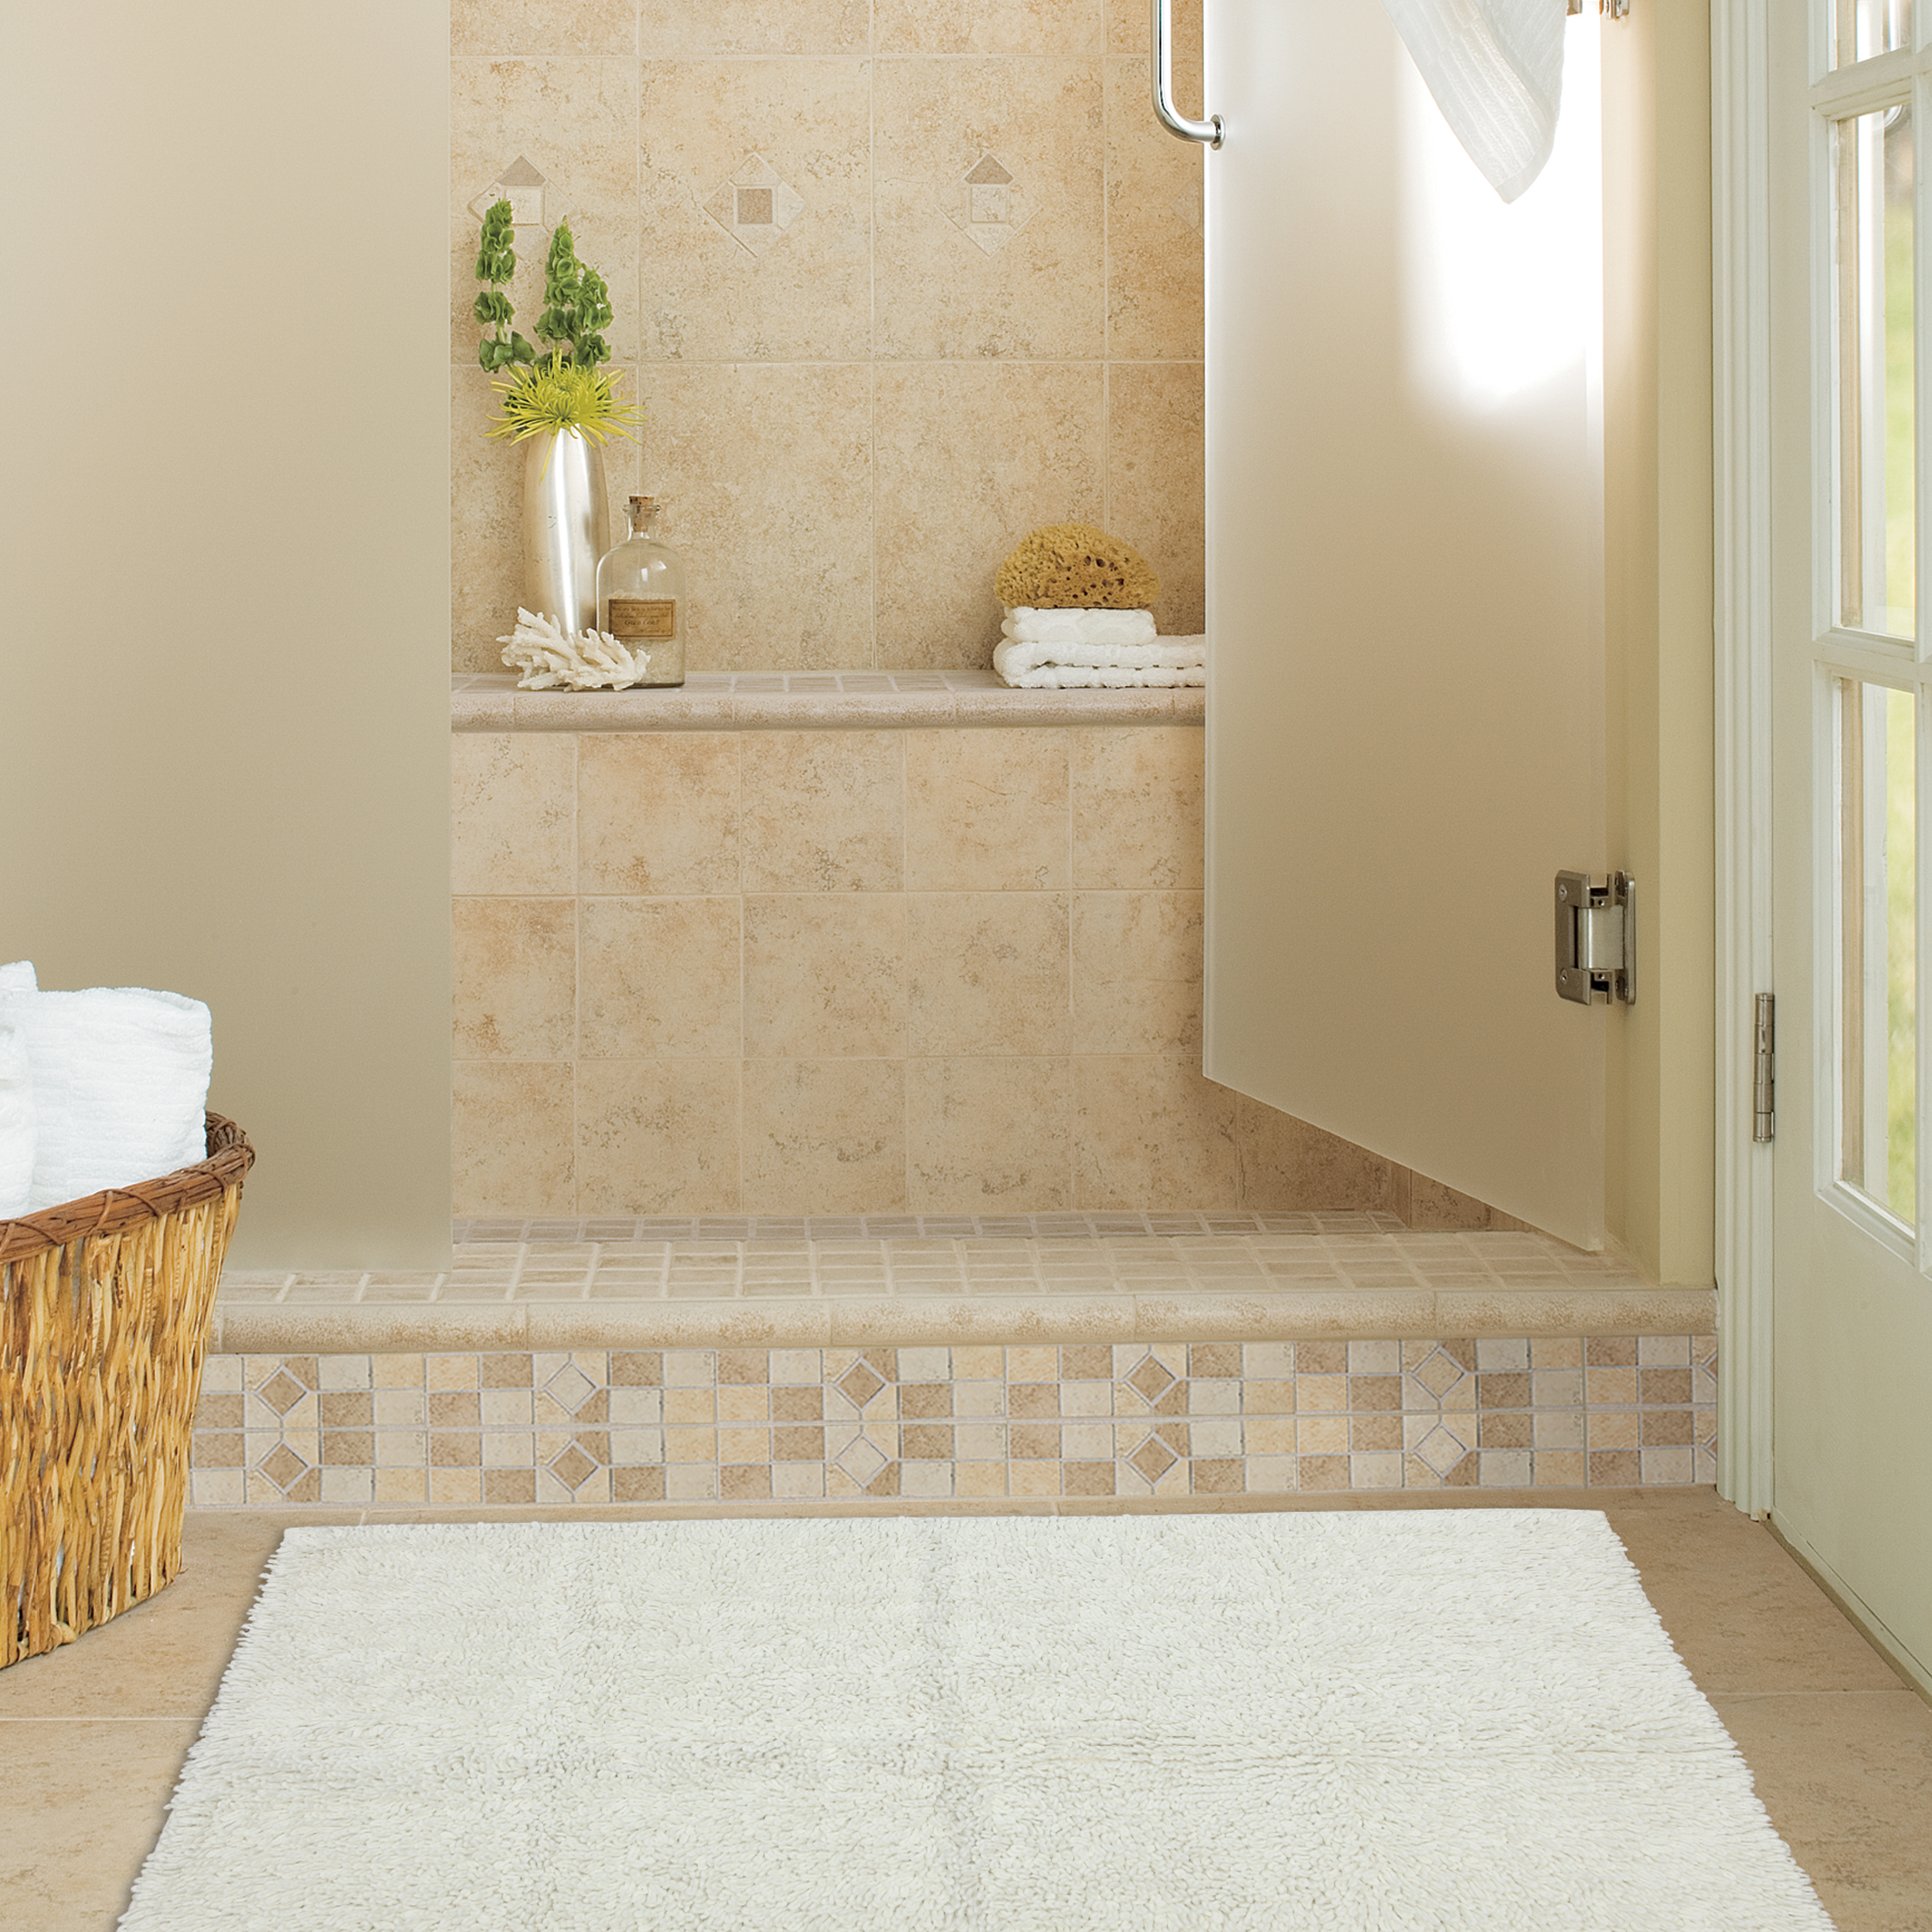 A Bathroom Rug to Warm Up the Room | Mohawk Homescapes